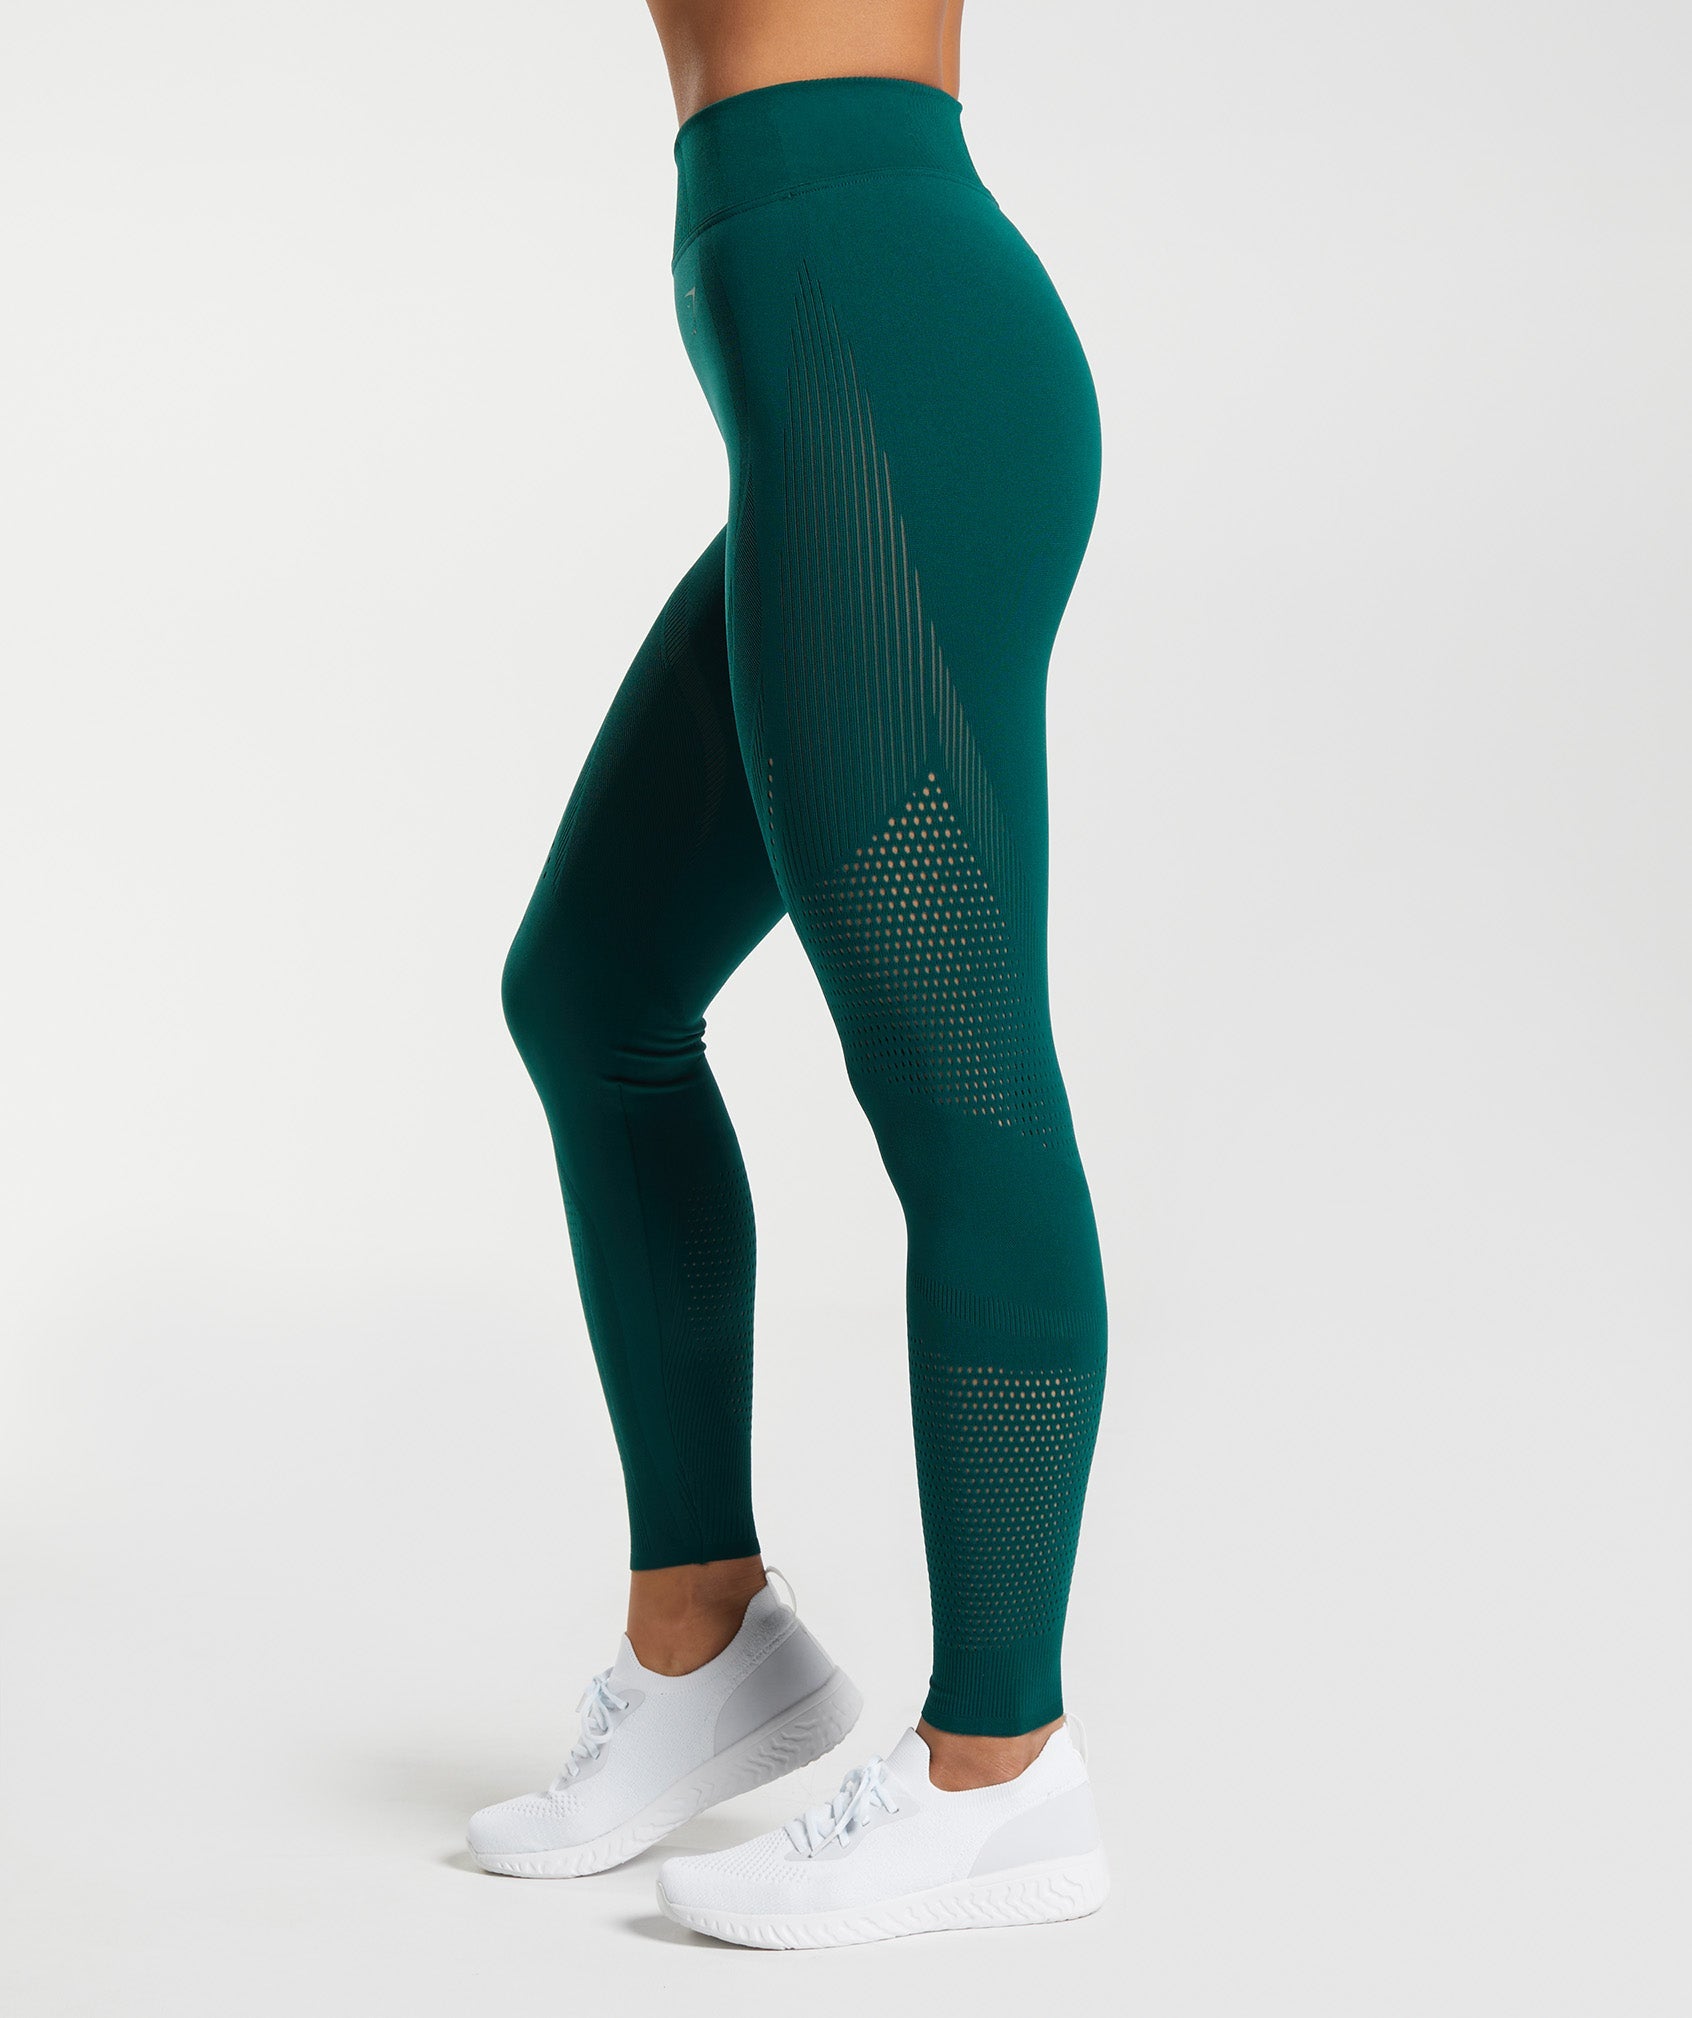 Warp Knit Tights in Woodland Green - view 3